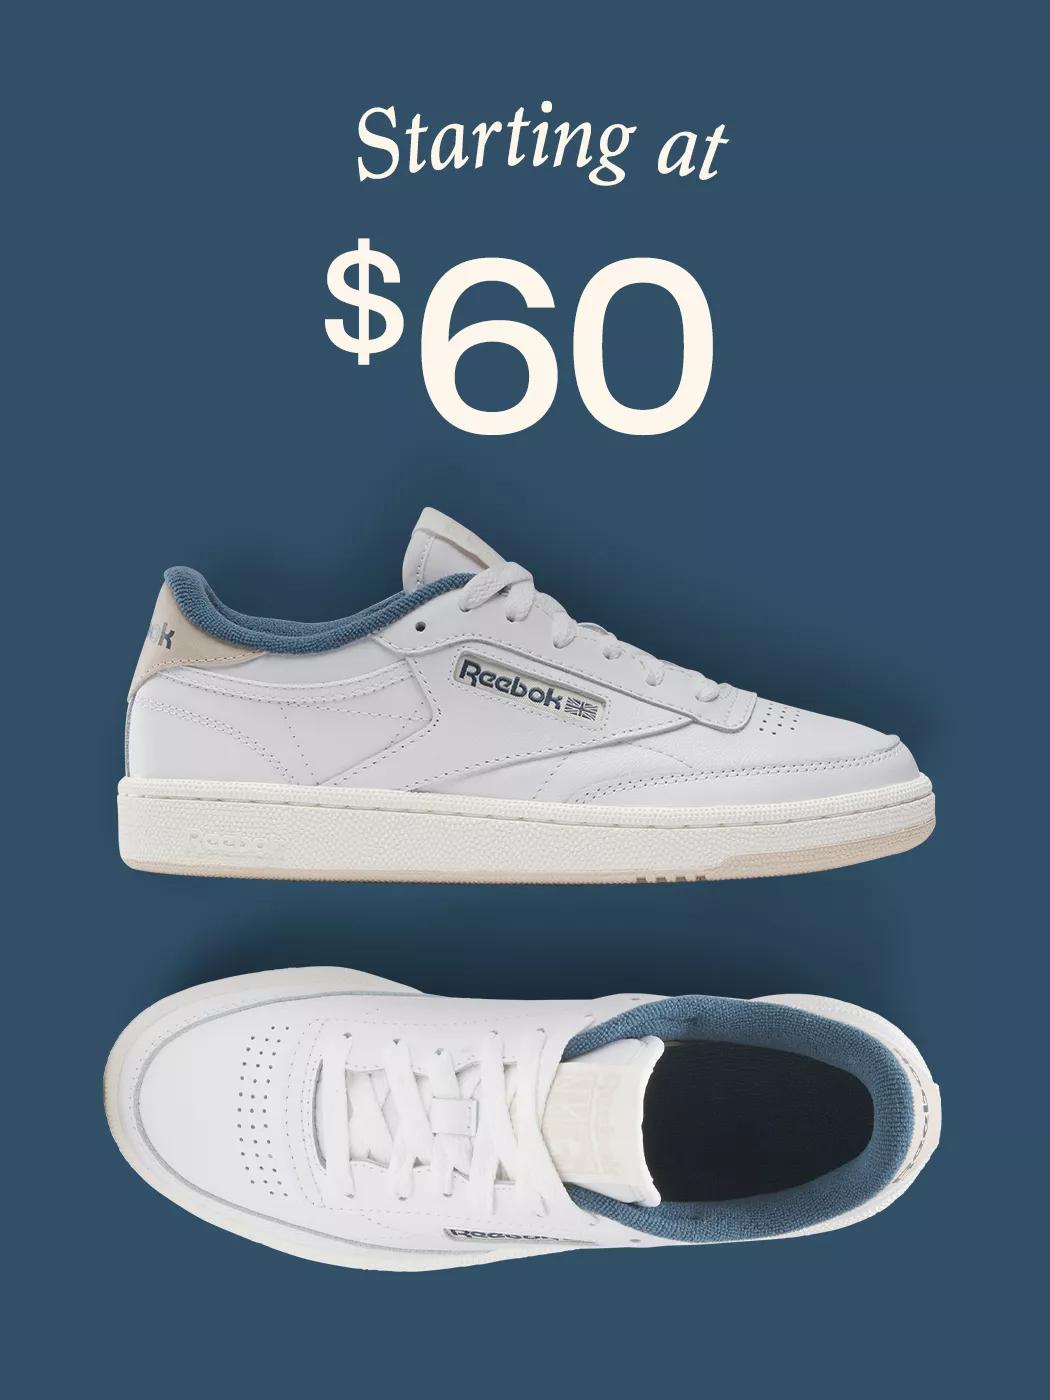 Shop Sneakers For Men, Women and Kids